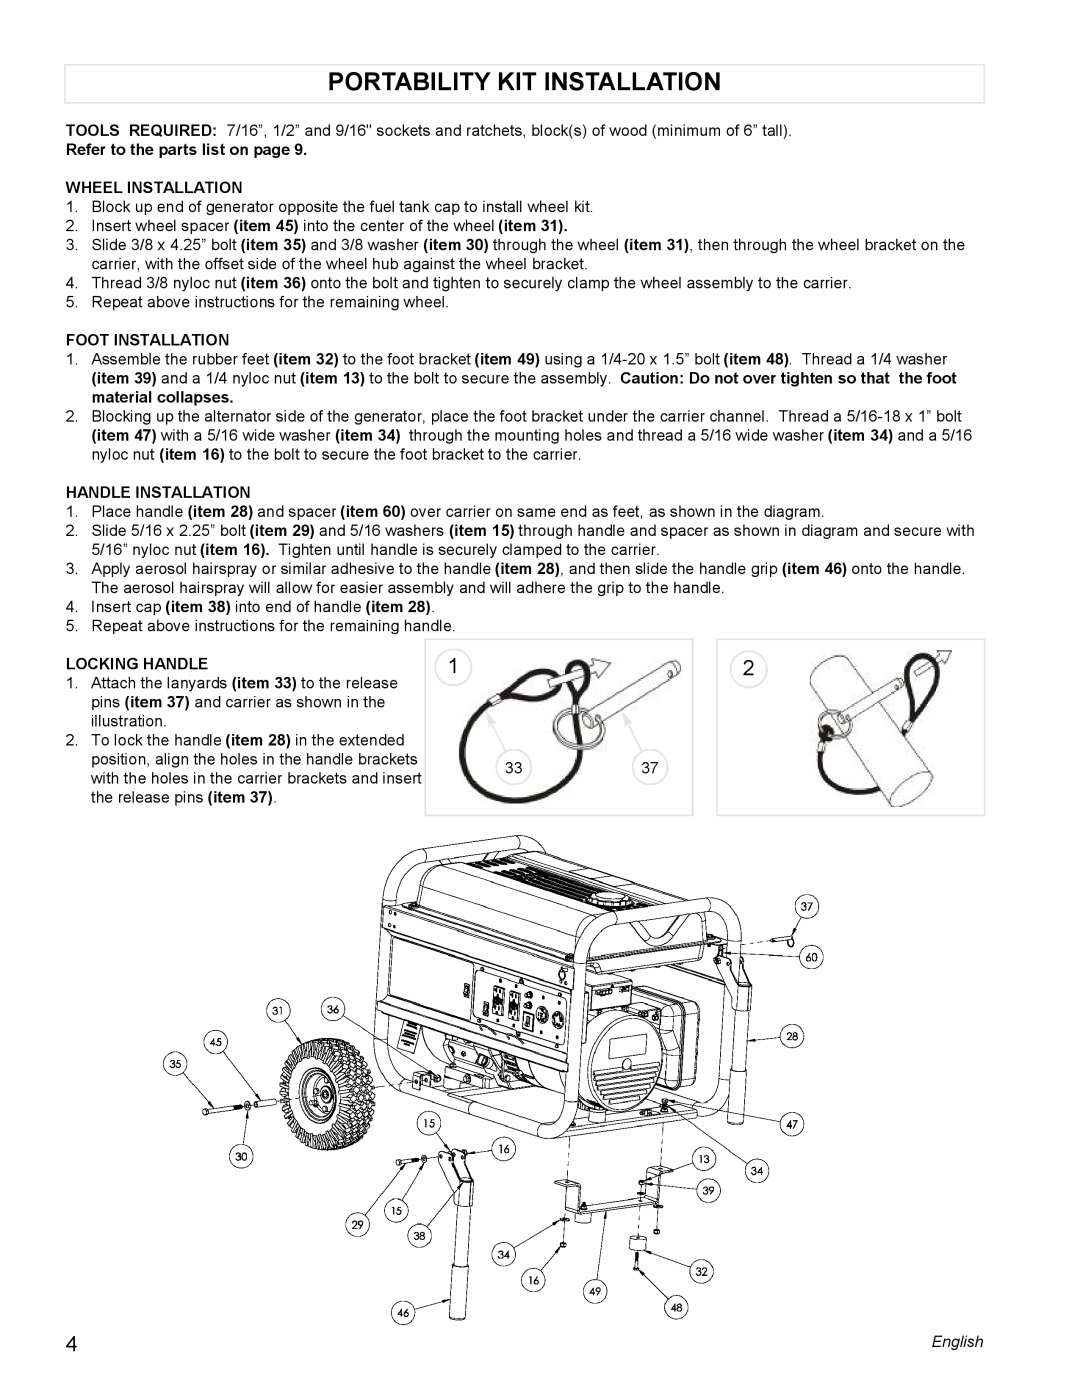 Powermate PM0605000 Portability Kit Installation, Refer to the parts list on page, Wheel Installation, Foot Installation 